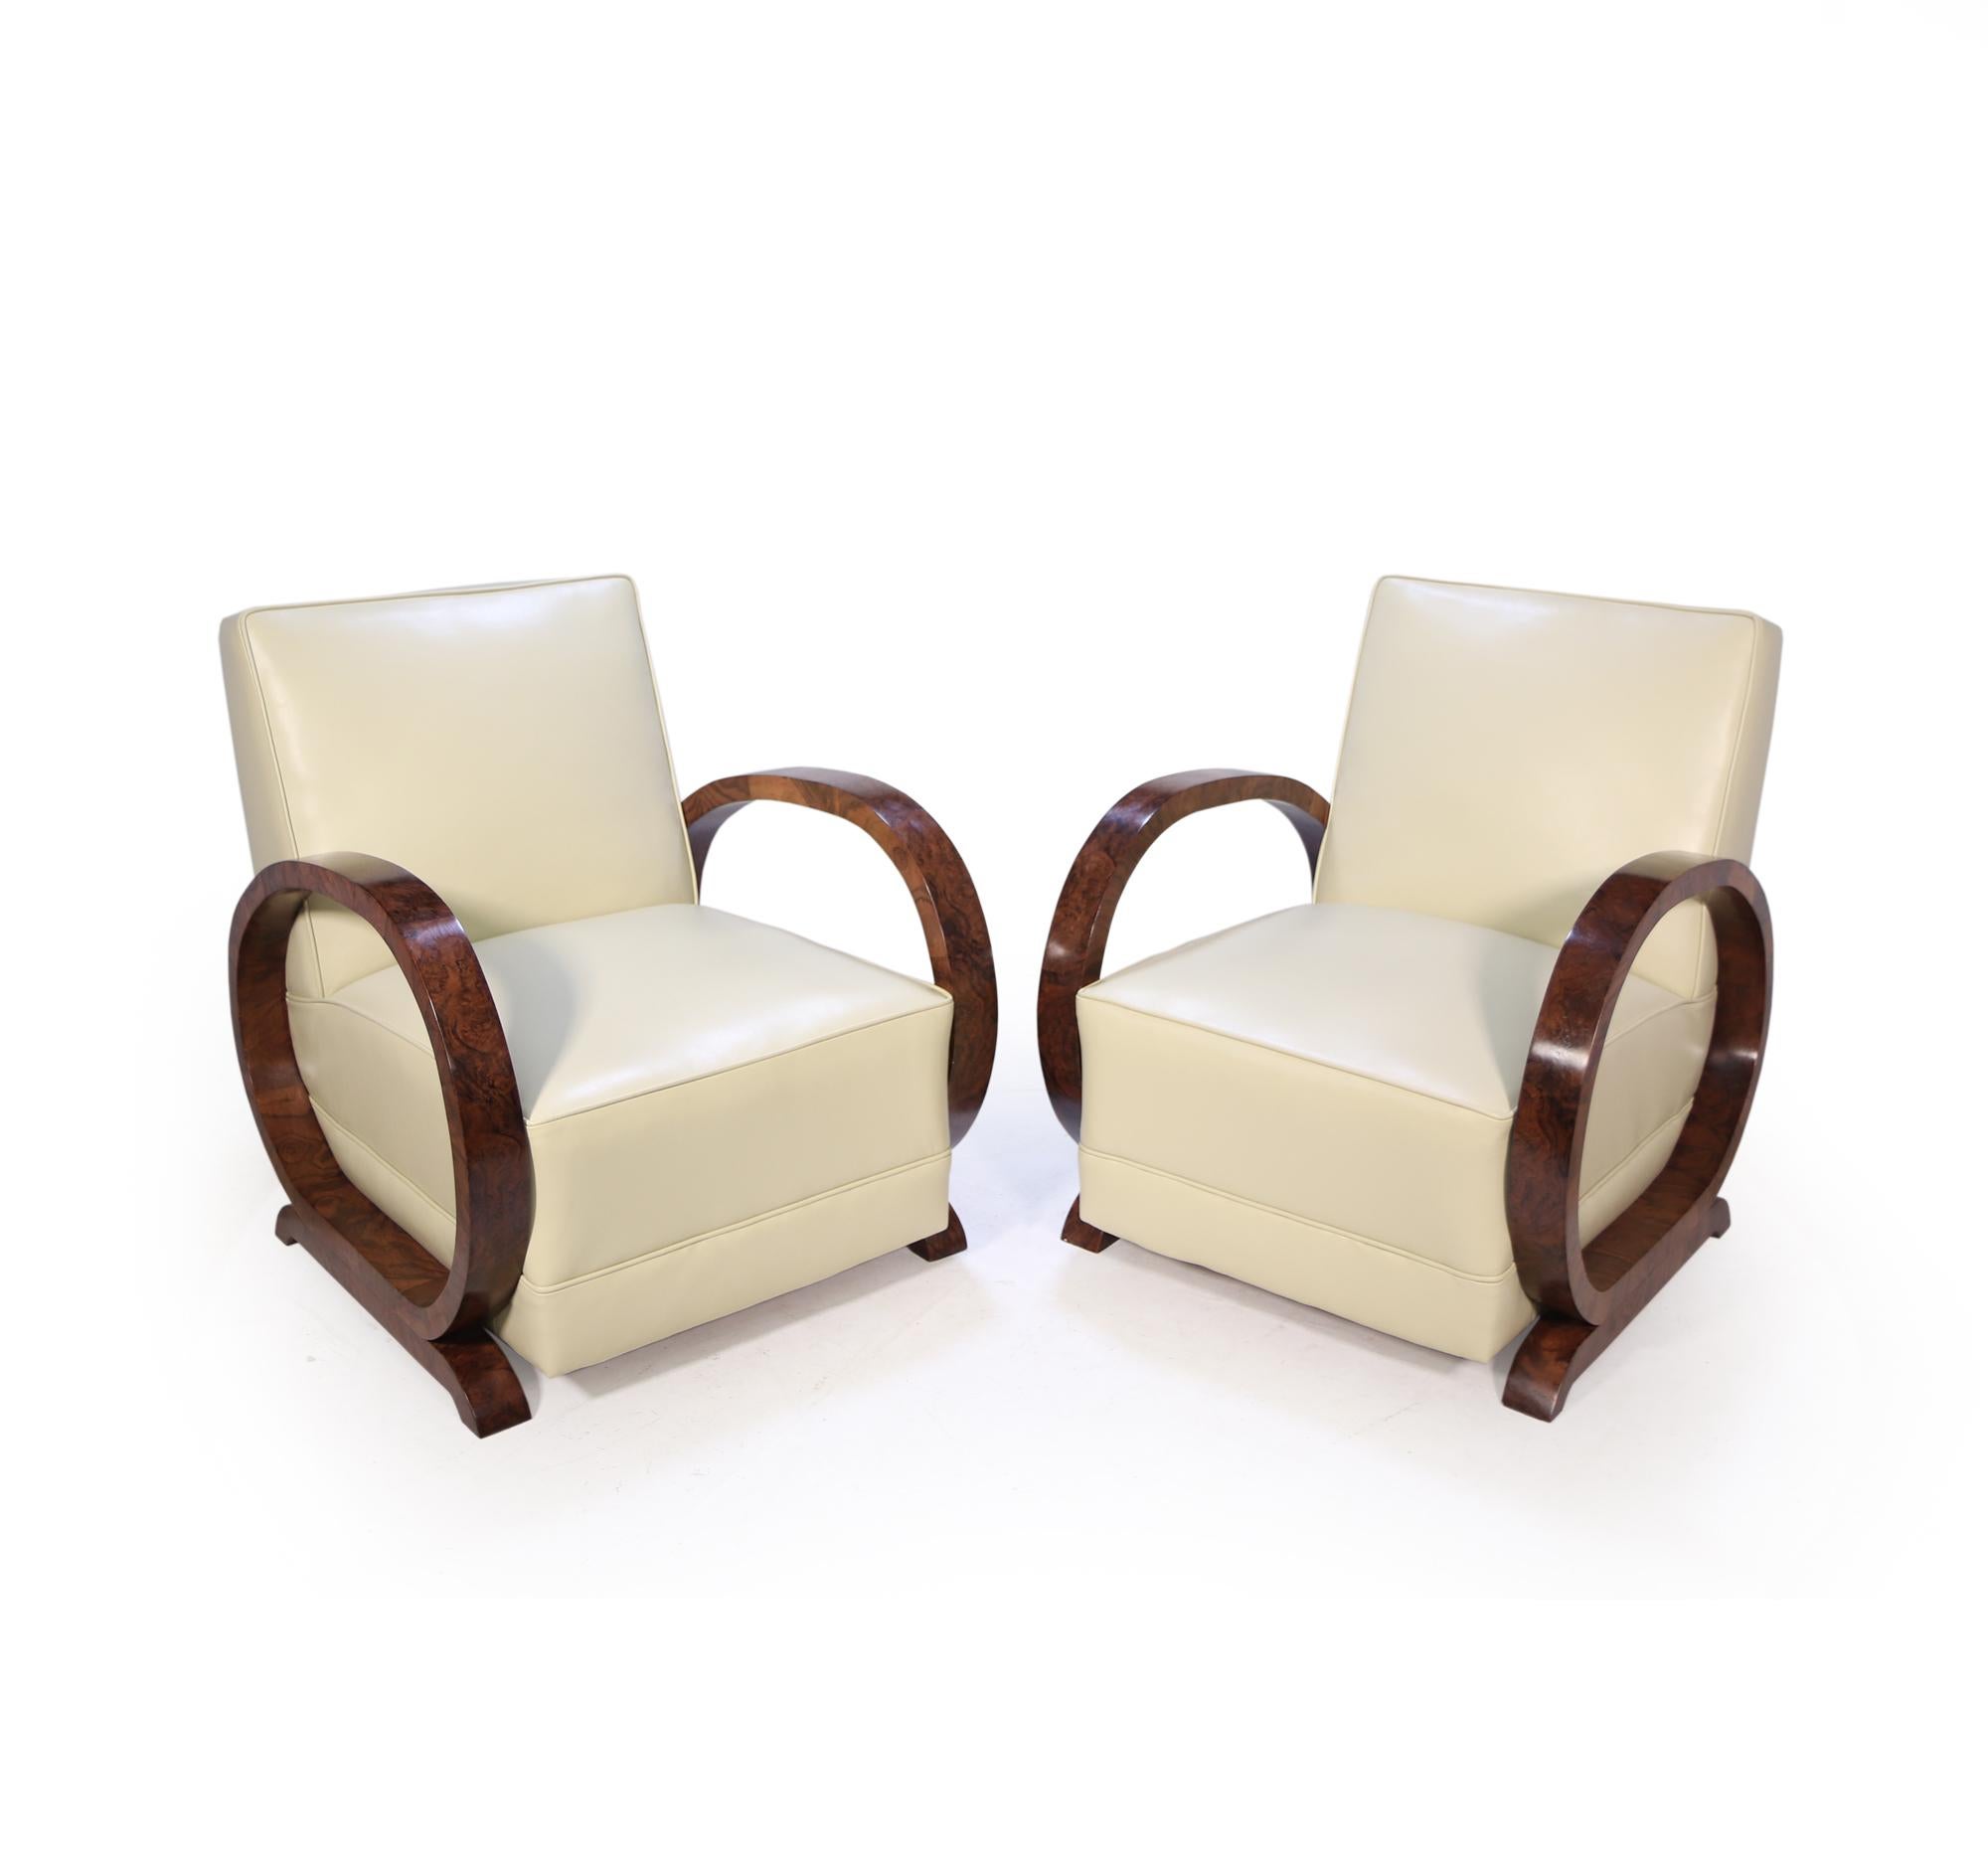 A pair of Italian Art Deco Burr walnut hoop armchairs with coil sprung seat and back re upholstered in thick leather hyde upholstery the chairs are in excellent condition throughout and show wood has been professionally polished

Age: